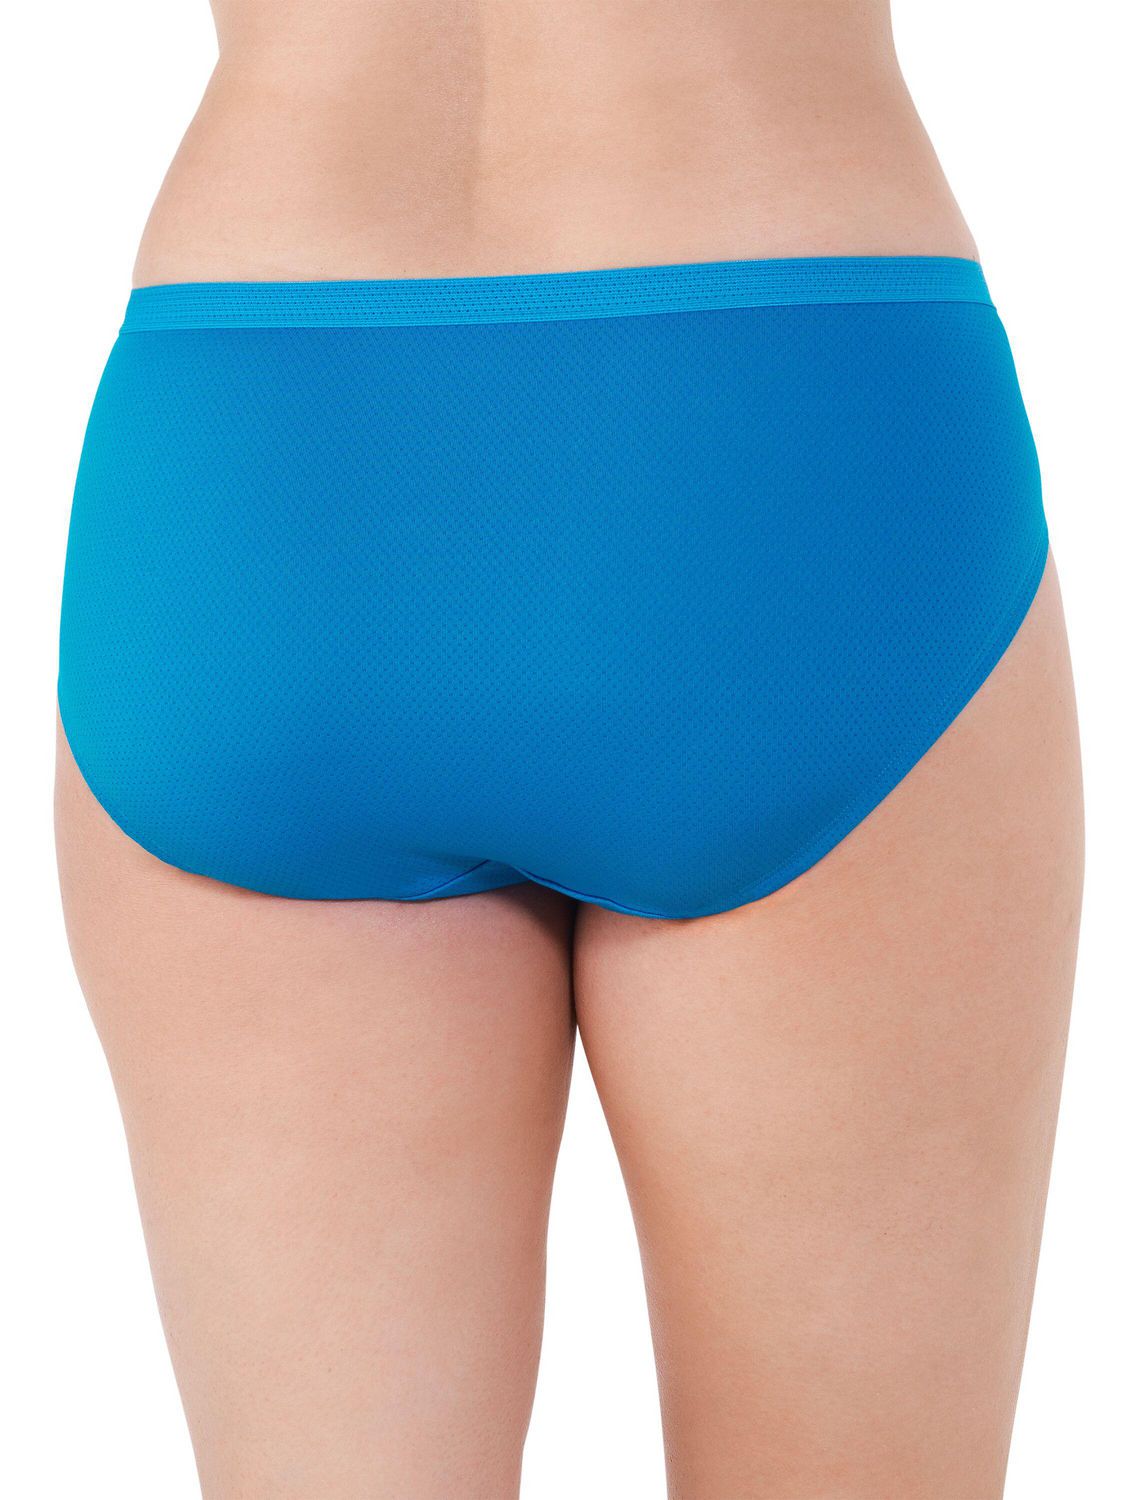 Fruit of the Loom Women's Fit for Me Plus Size Underwear, Brief